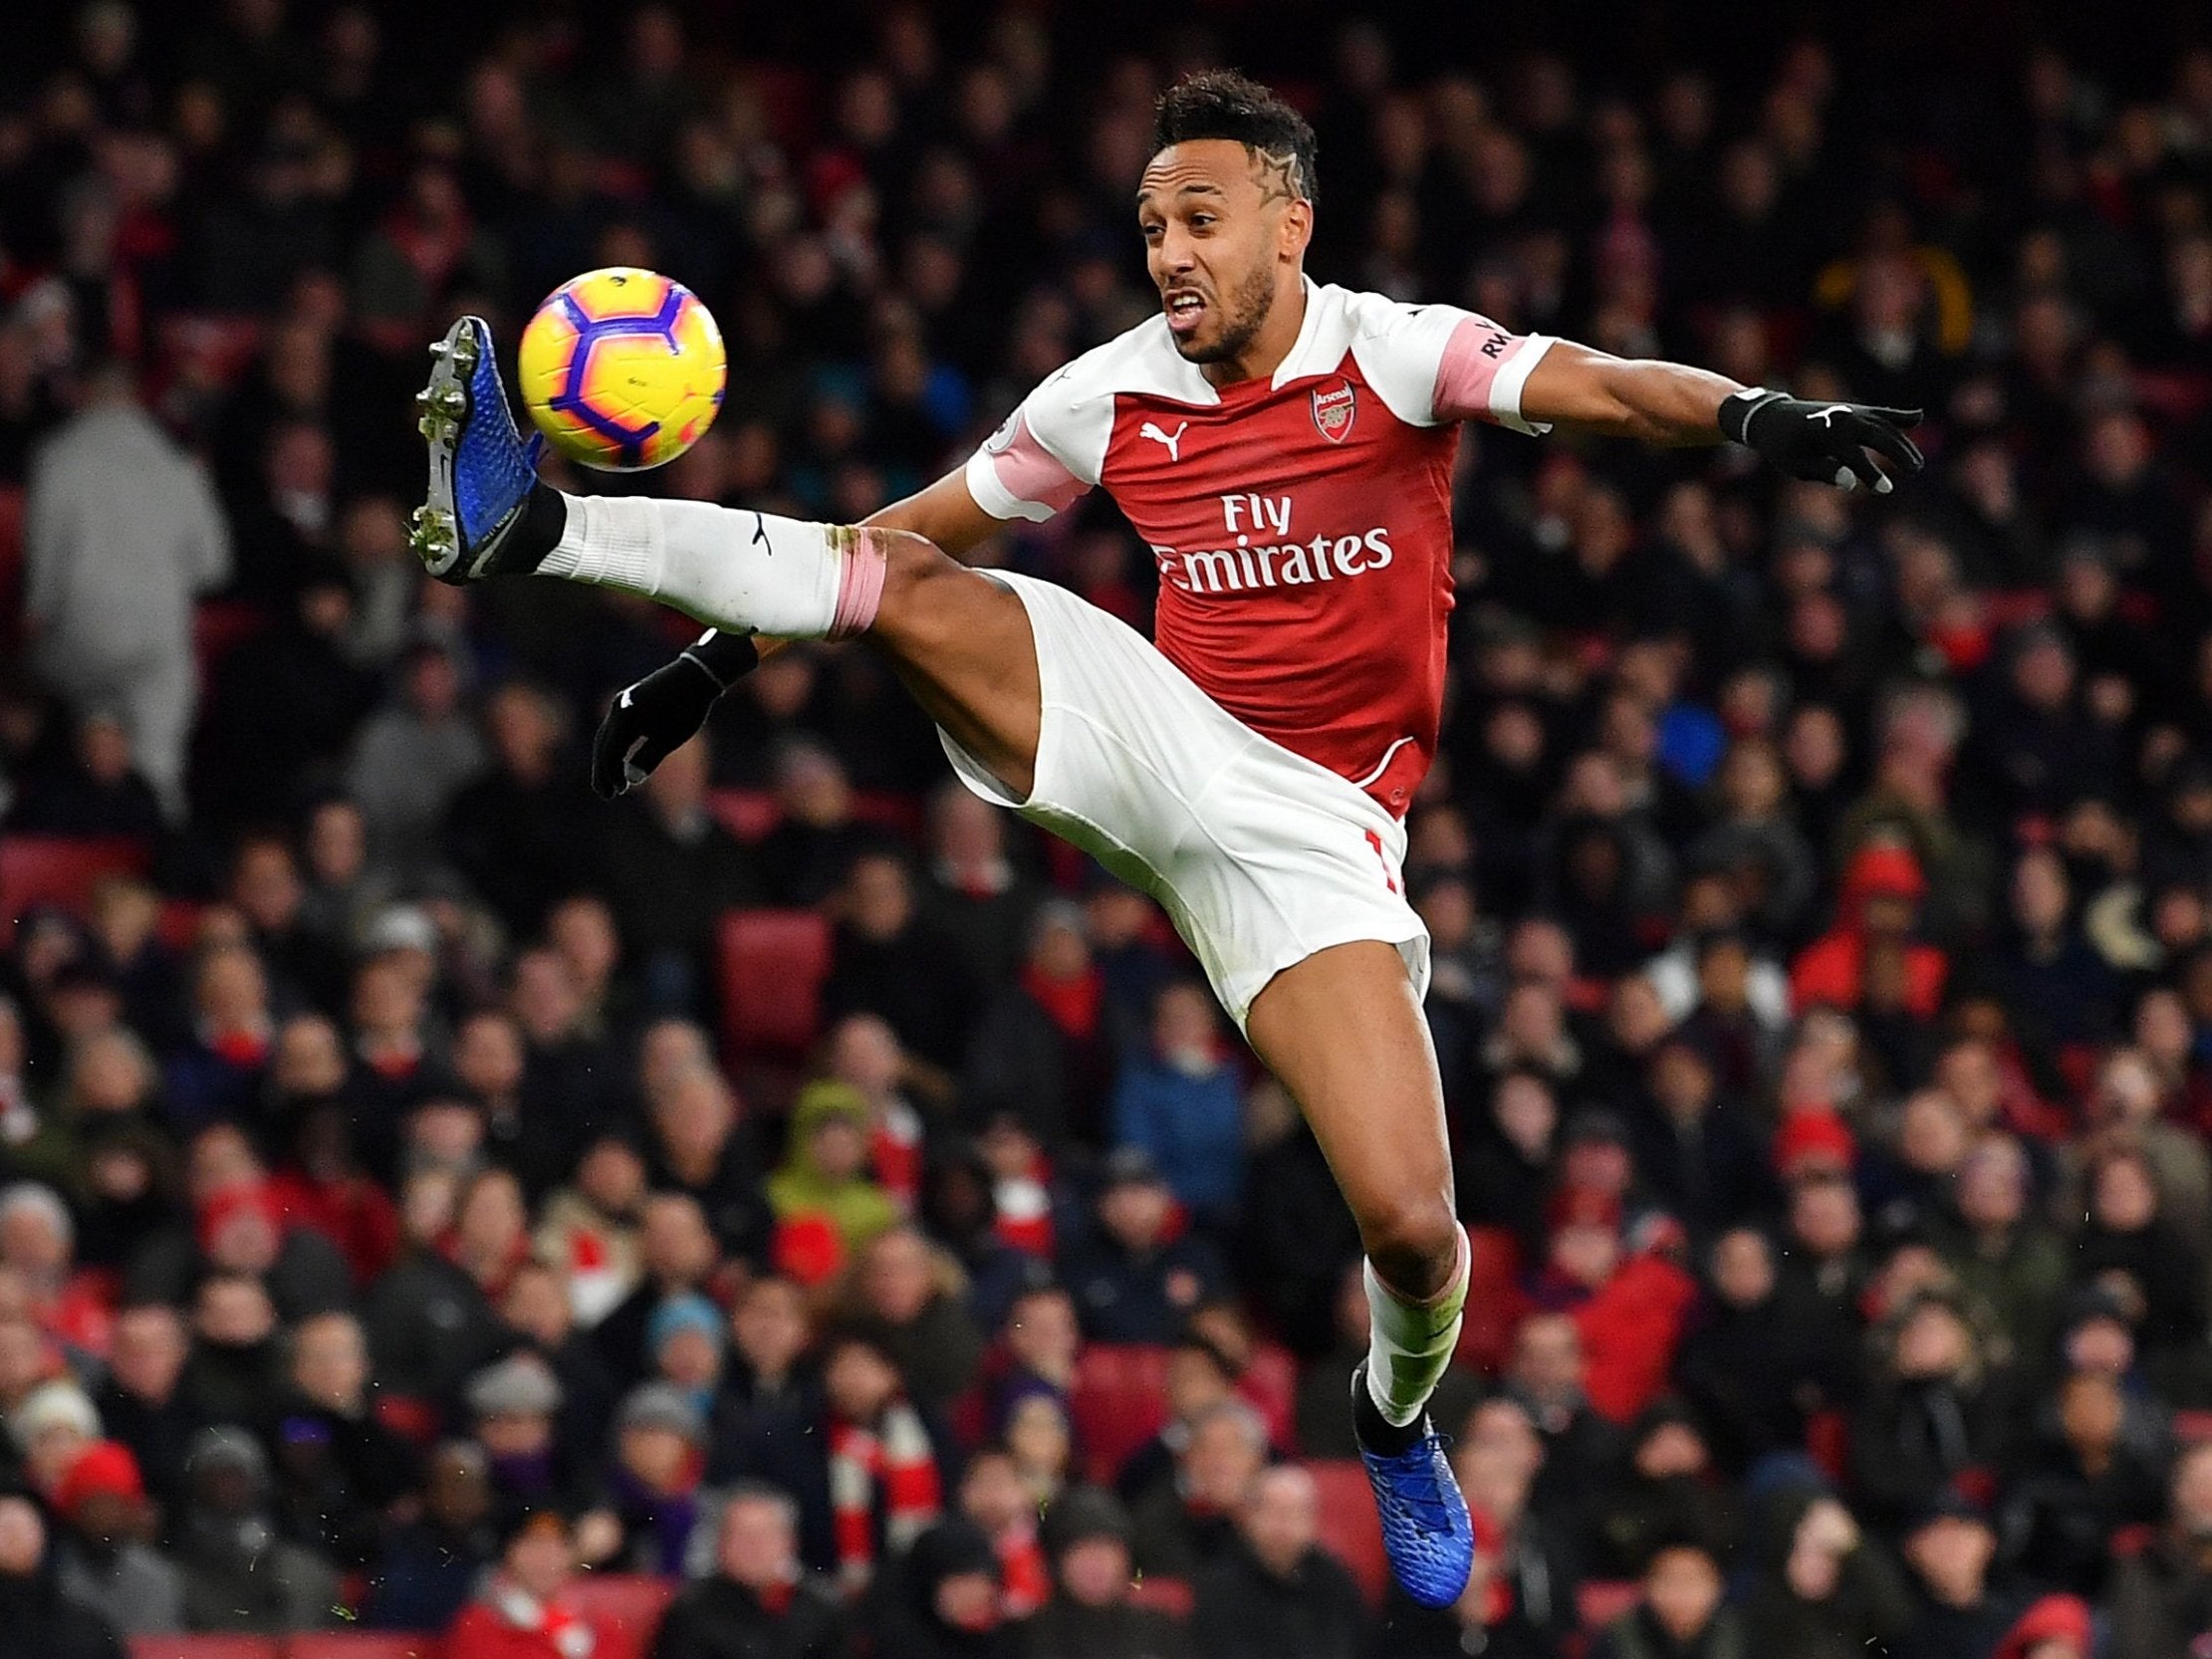 Pierre-Emerick Aubameyang is in fine form for Arsenal